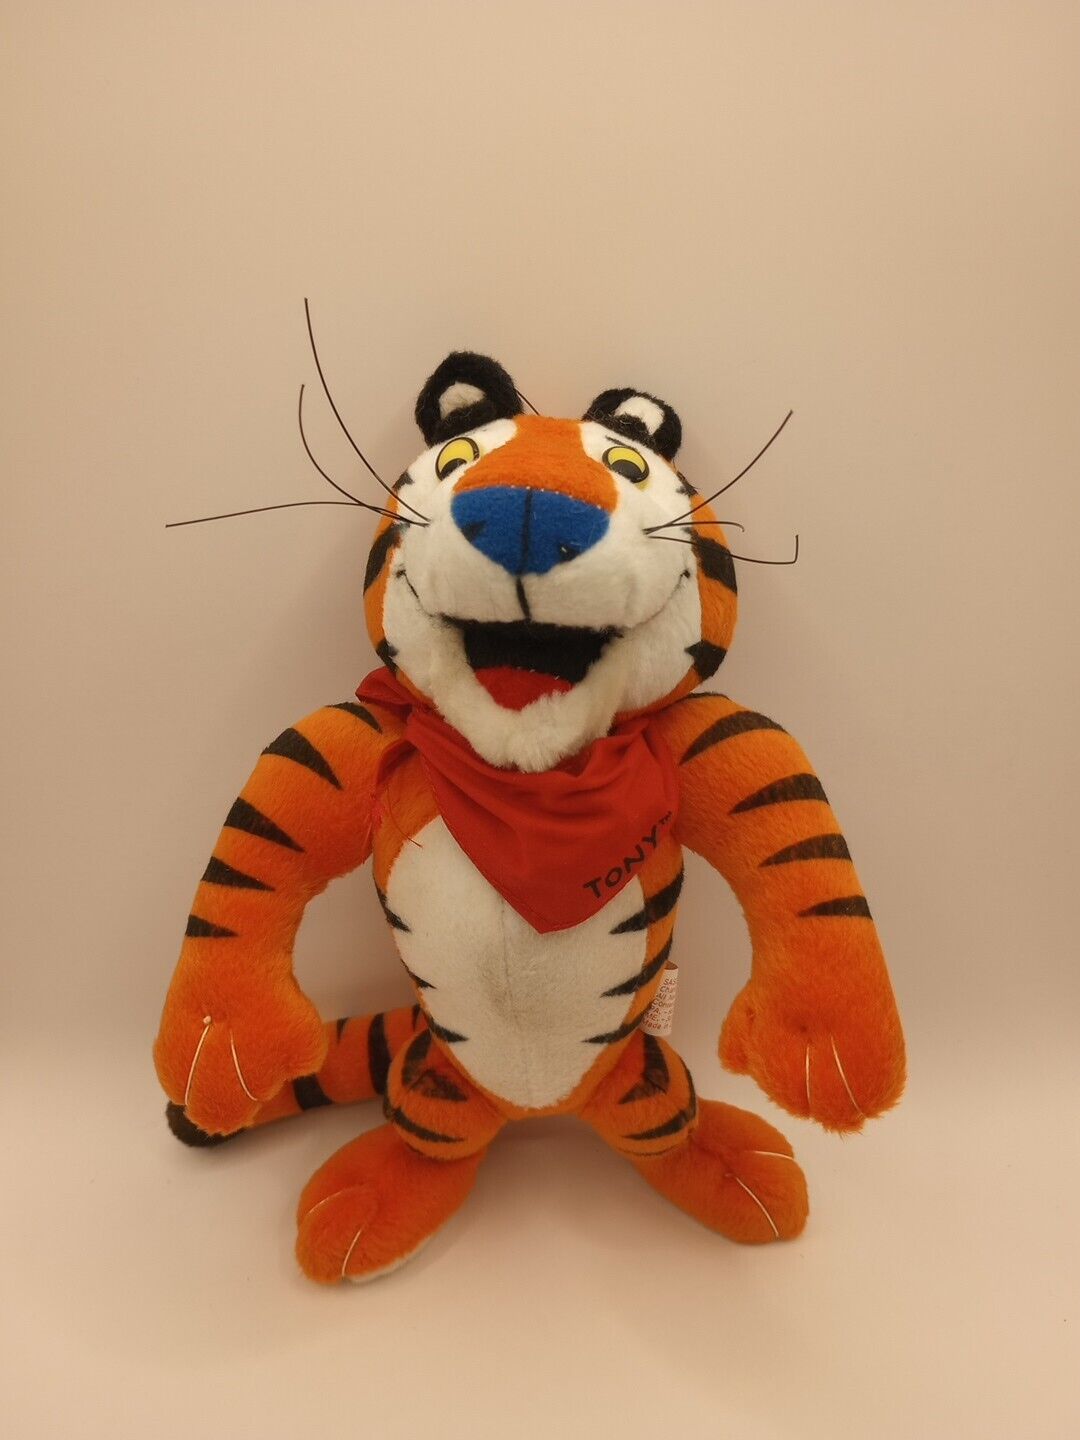 Vintage Kellog's Tony The Tiger Plush Frosted Flakes Cereal 1997 Stuffed Animal 